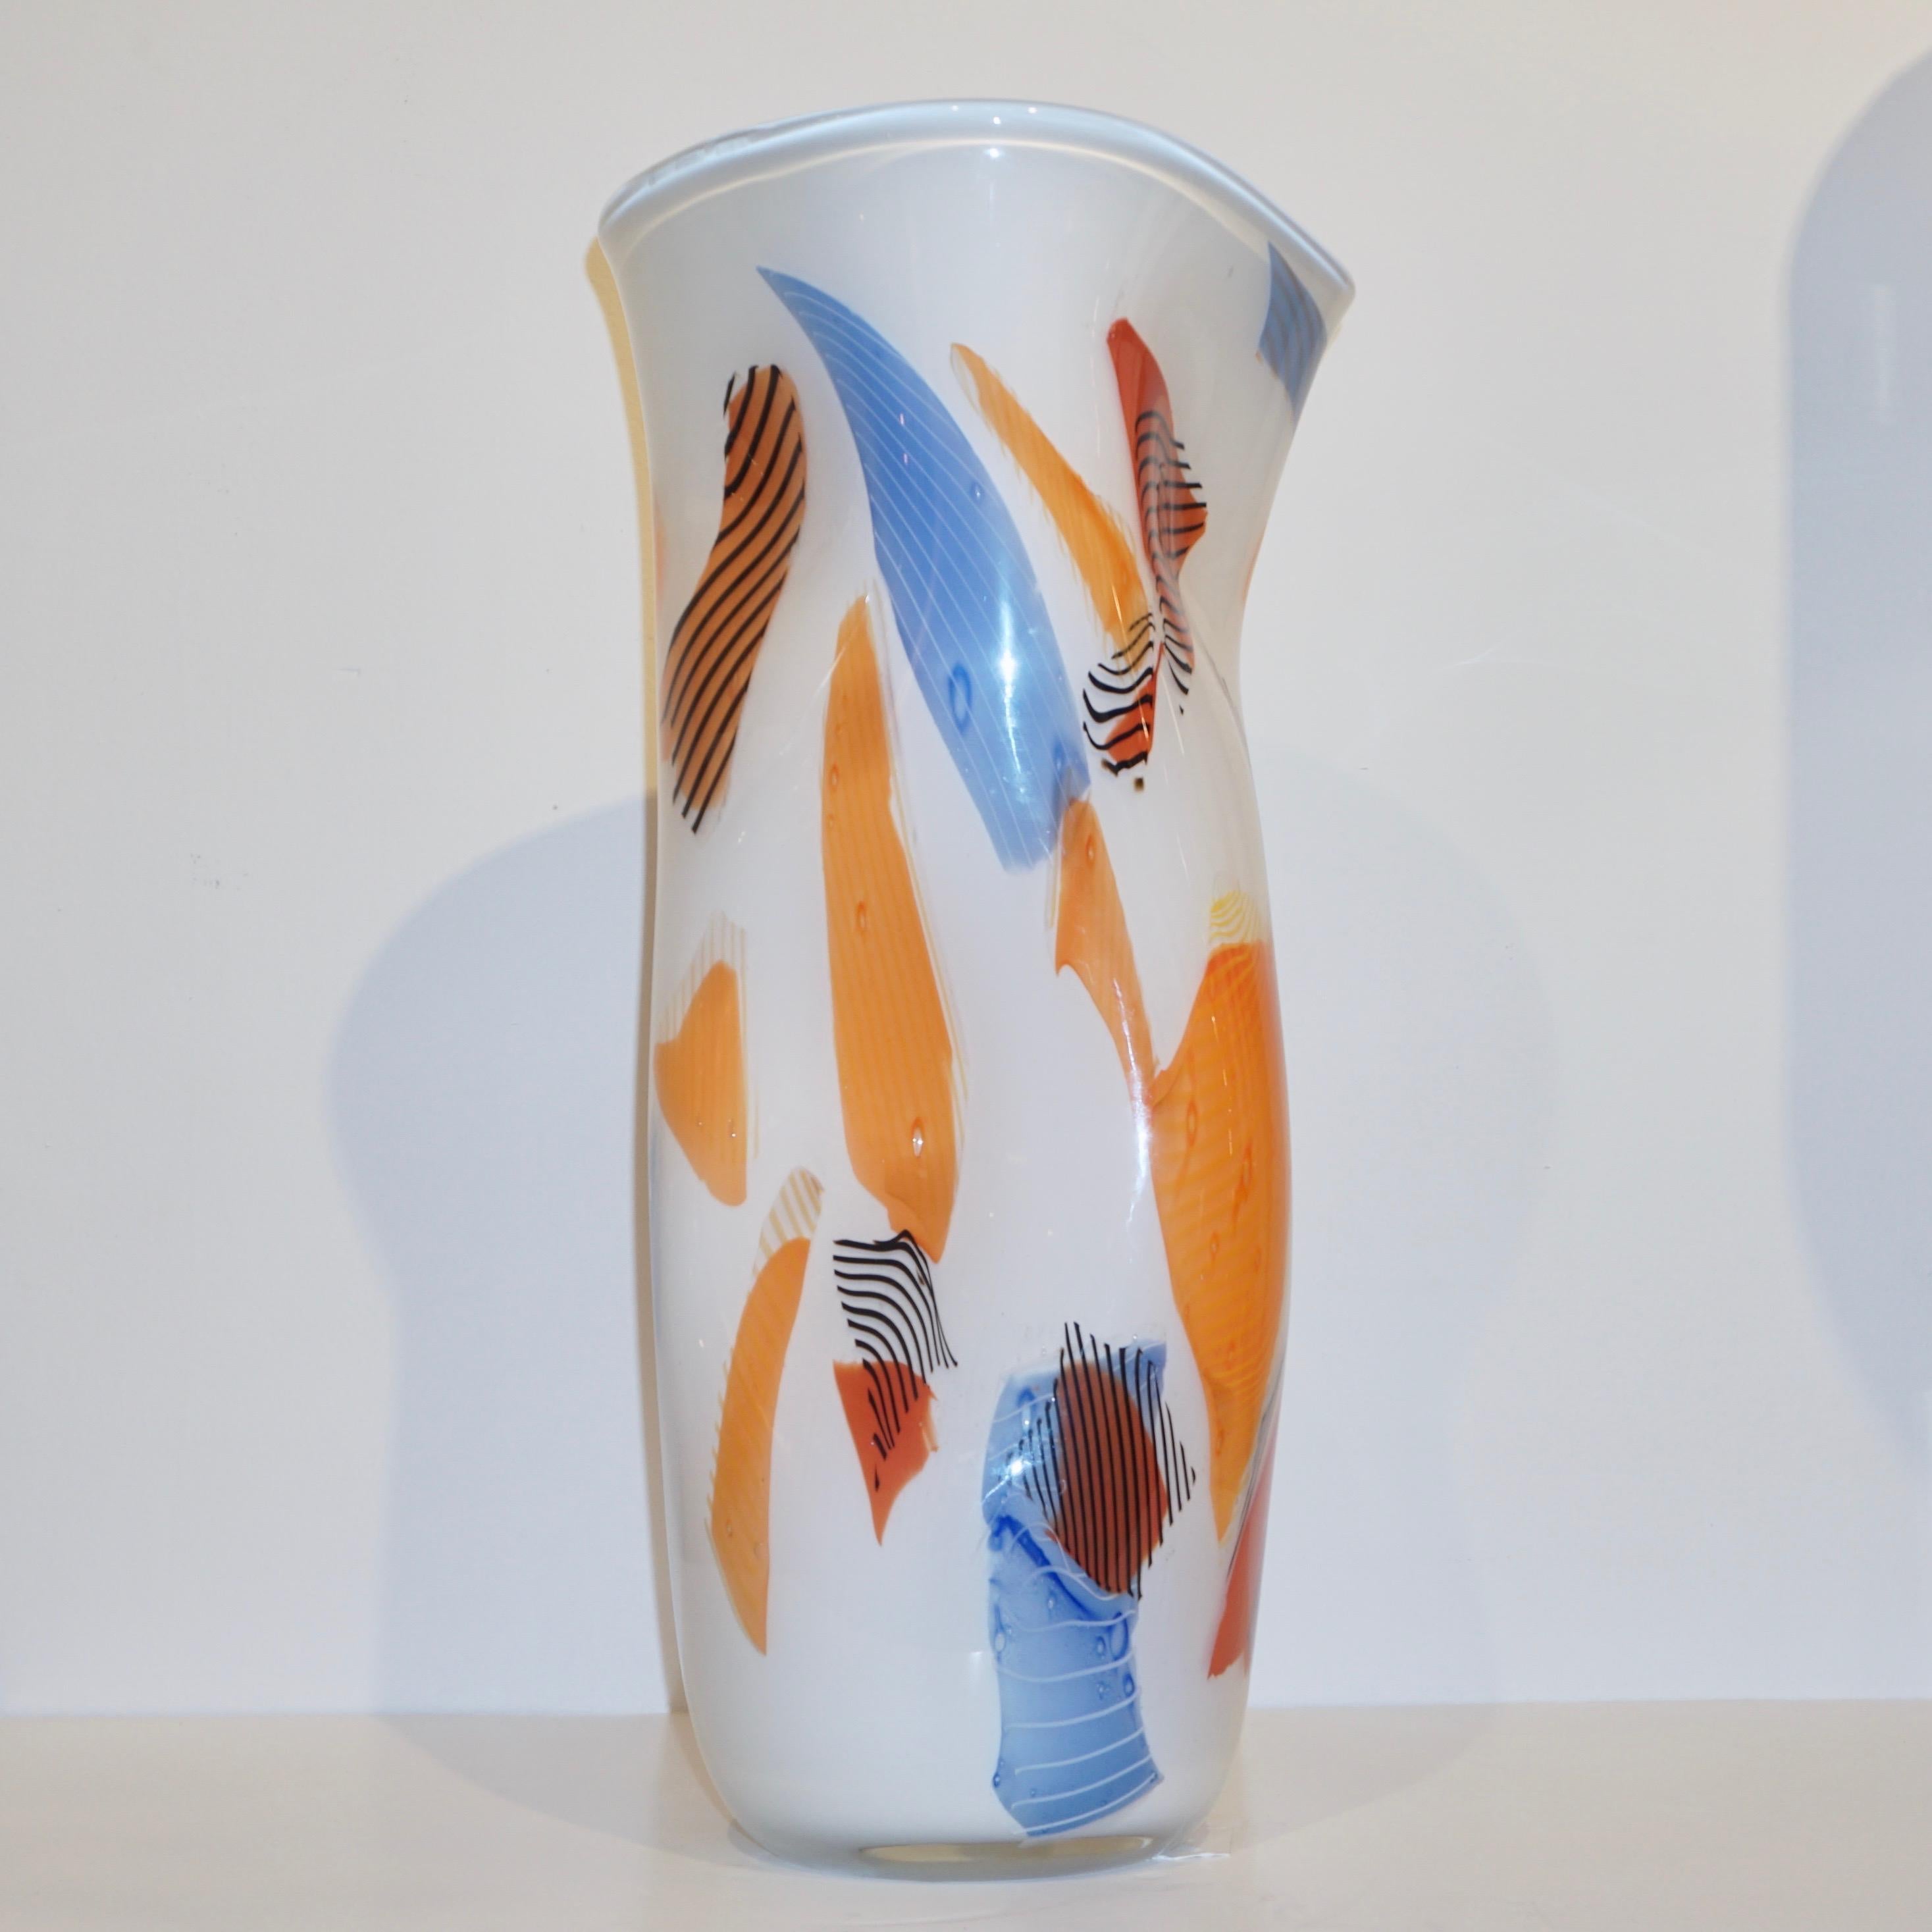 Venetian organic modern vase, contemporary Work of Art signed by Davide Donà in blown Murano Art glass with post modern design. This striking ivory pearl white vase overlaid in crystal Murano glass is beautifully worked with murrine insets in